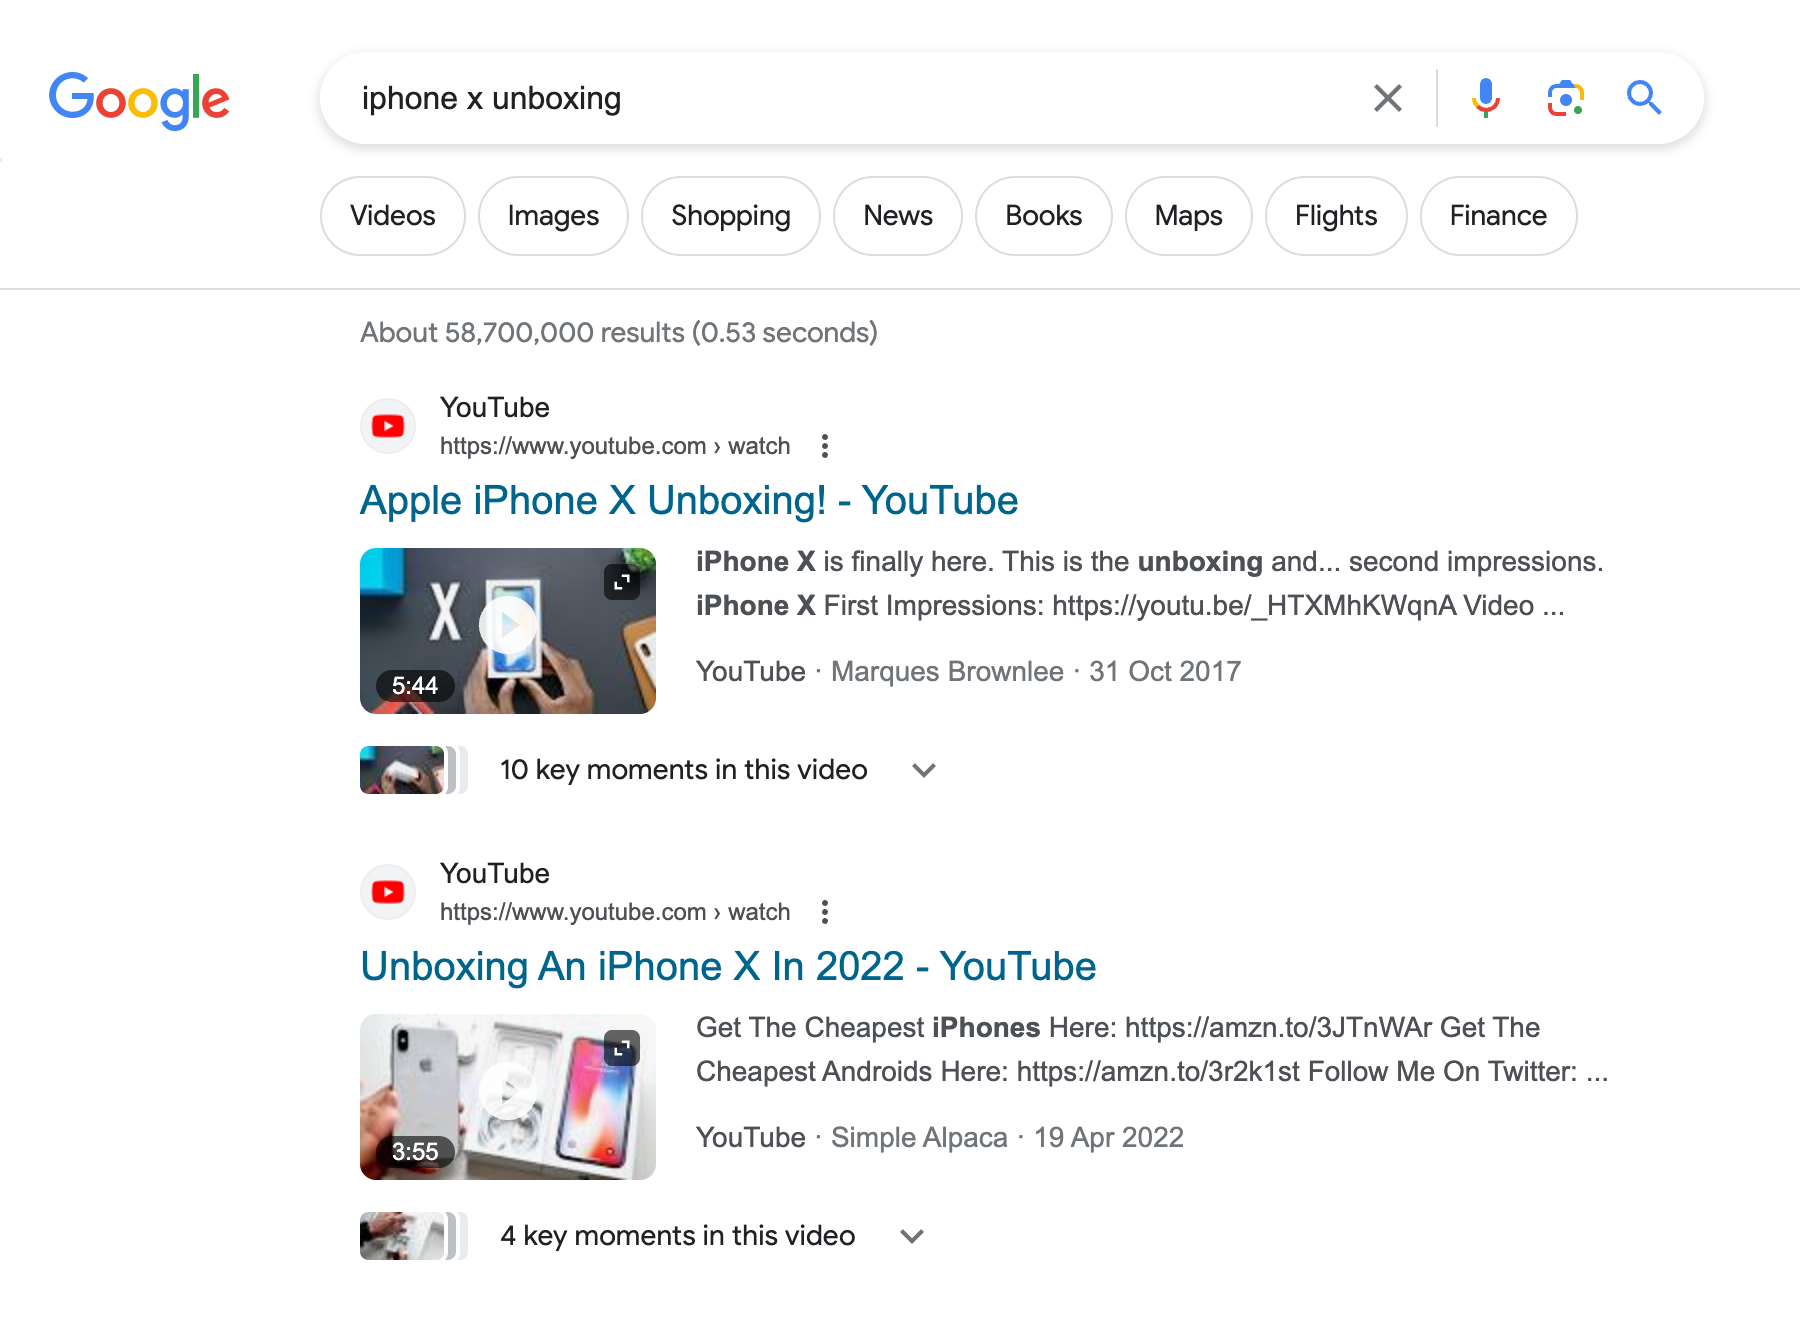 Search results page for the search query "iphone x unboxing". First, a Featured Snippet box is displayed showing videos on YouTube.